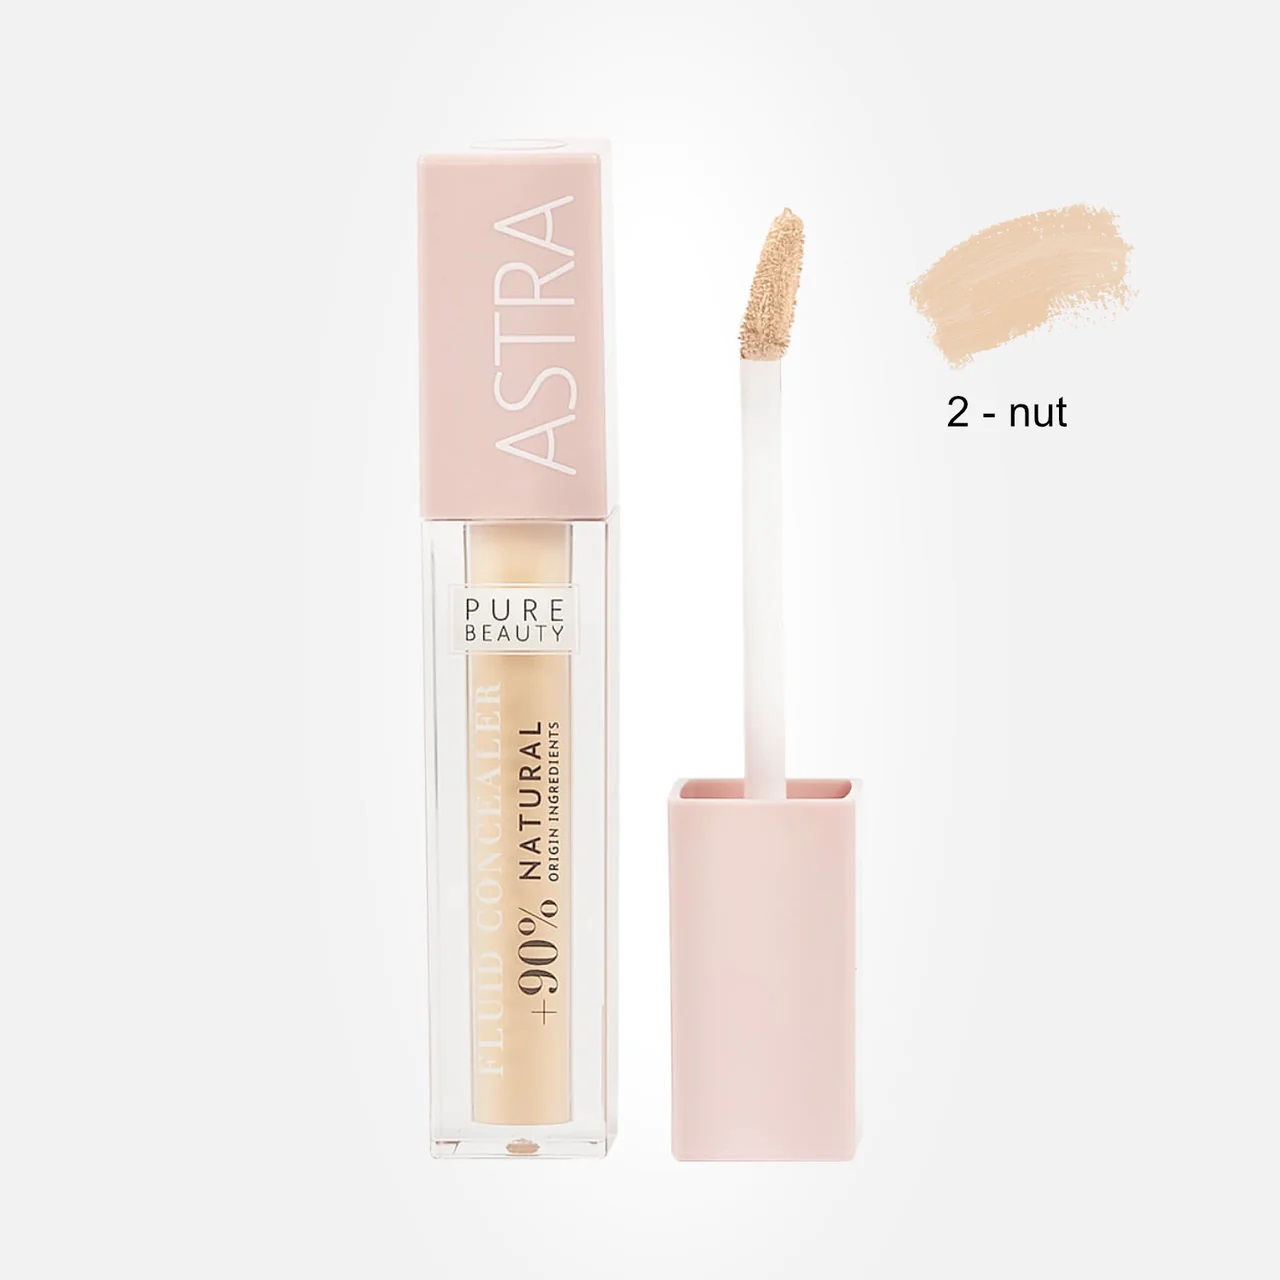 Image of Fluid Concealer 2 Pure Beauty Correttore Fluido Astra